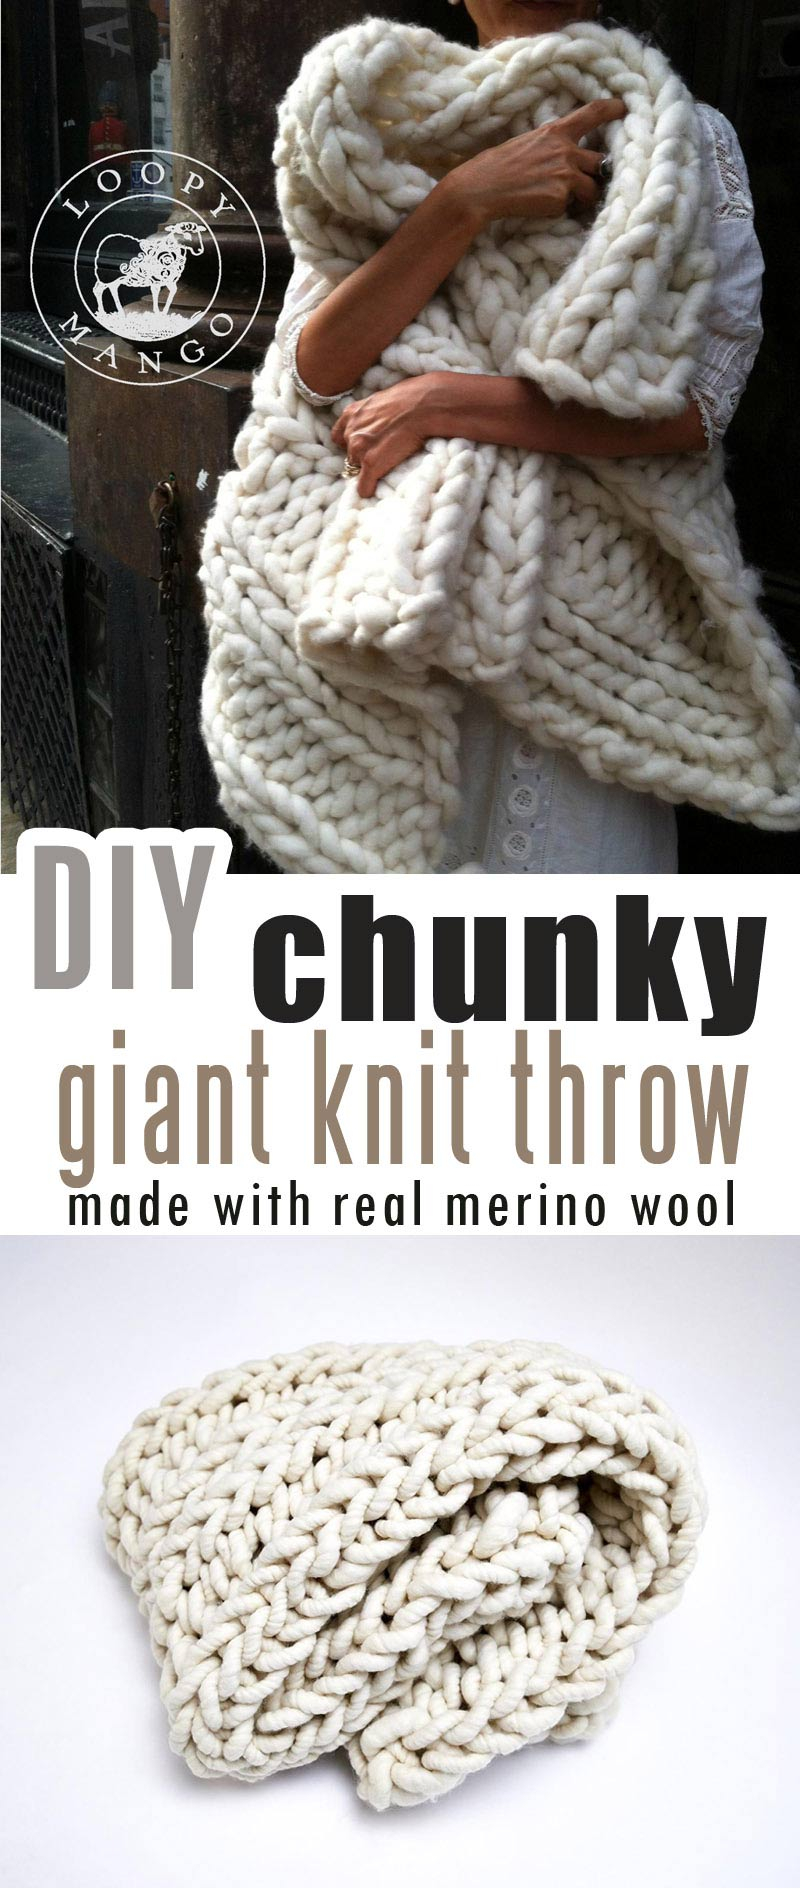 Chunky Knit Blanket Pattern How To Make Diy Chunky Knit Blanket Arm Knit Or Finger Knit